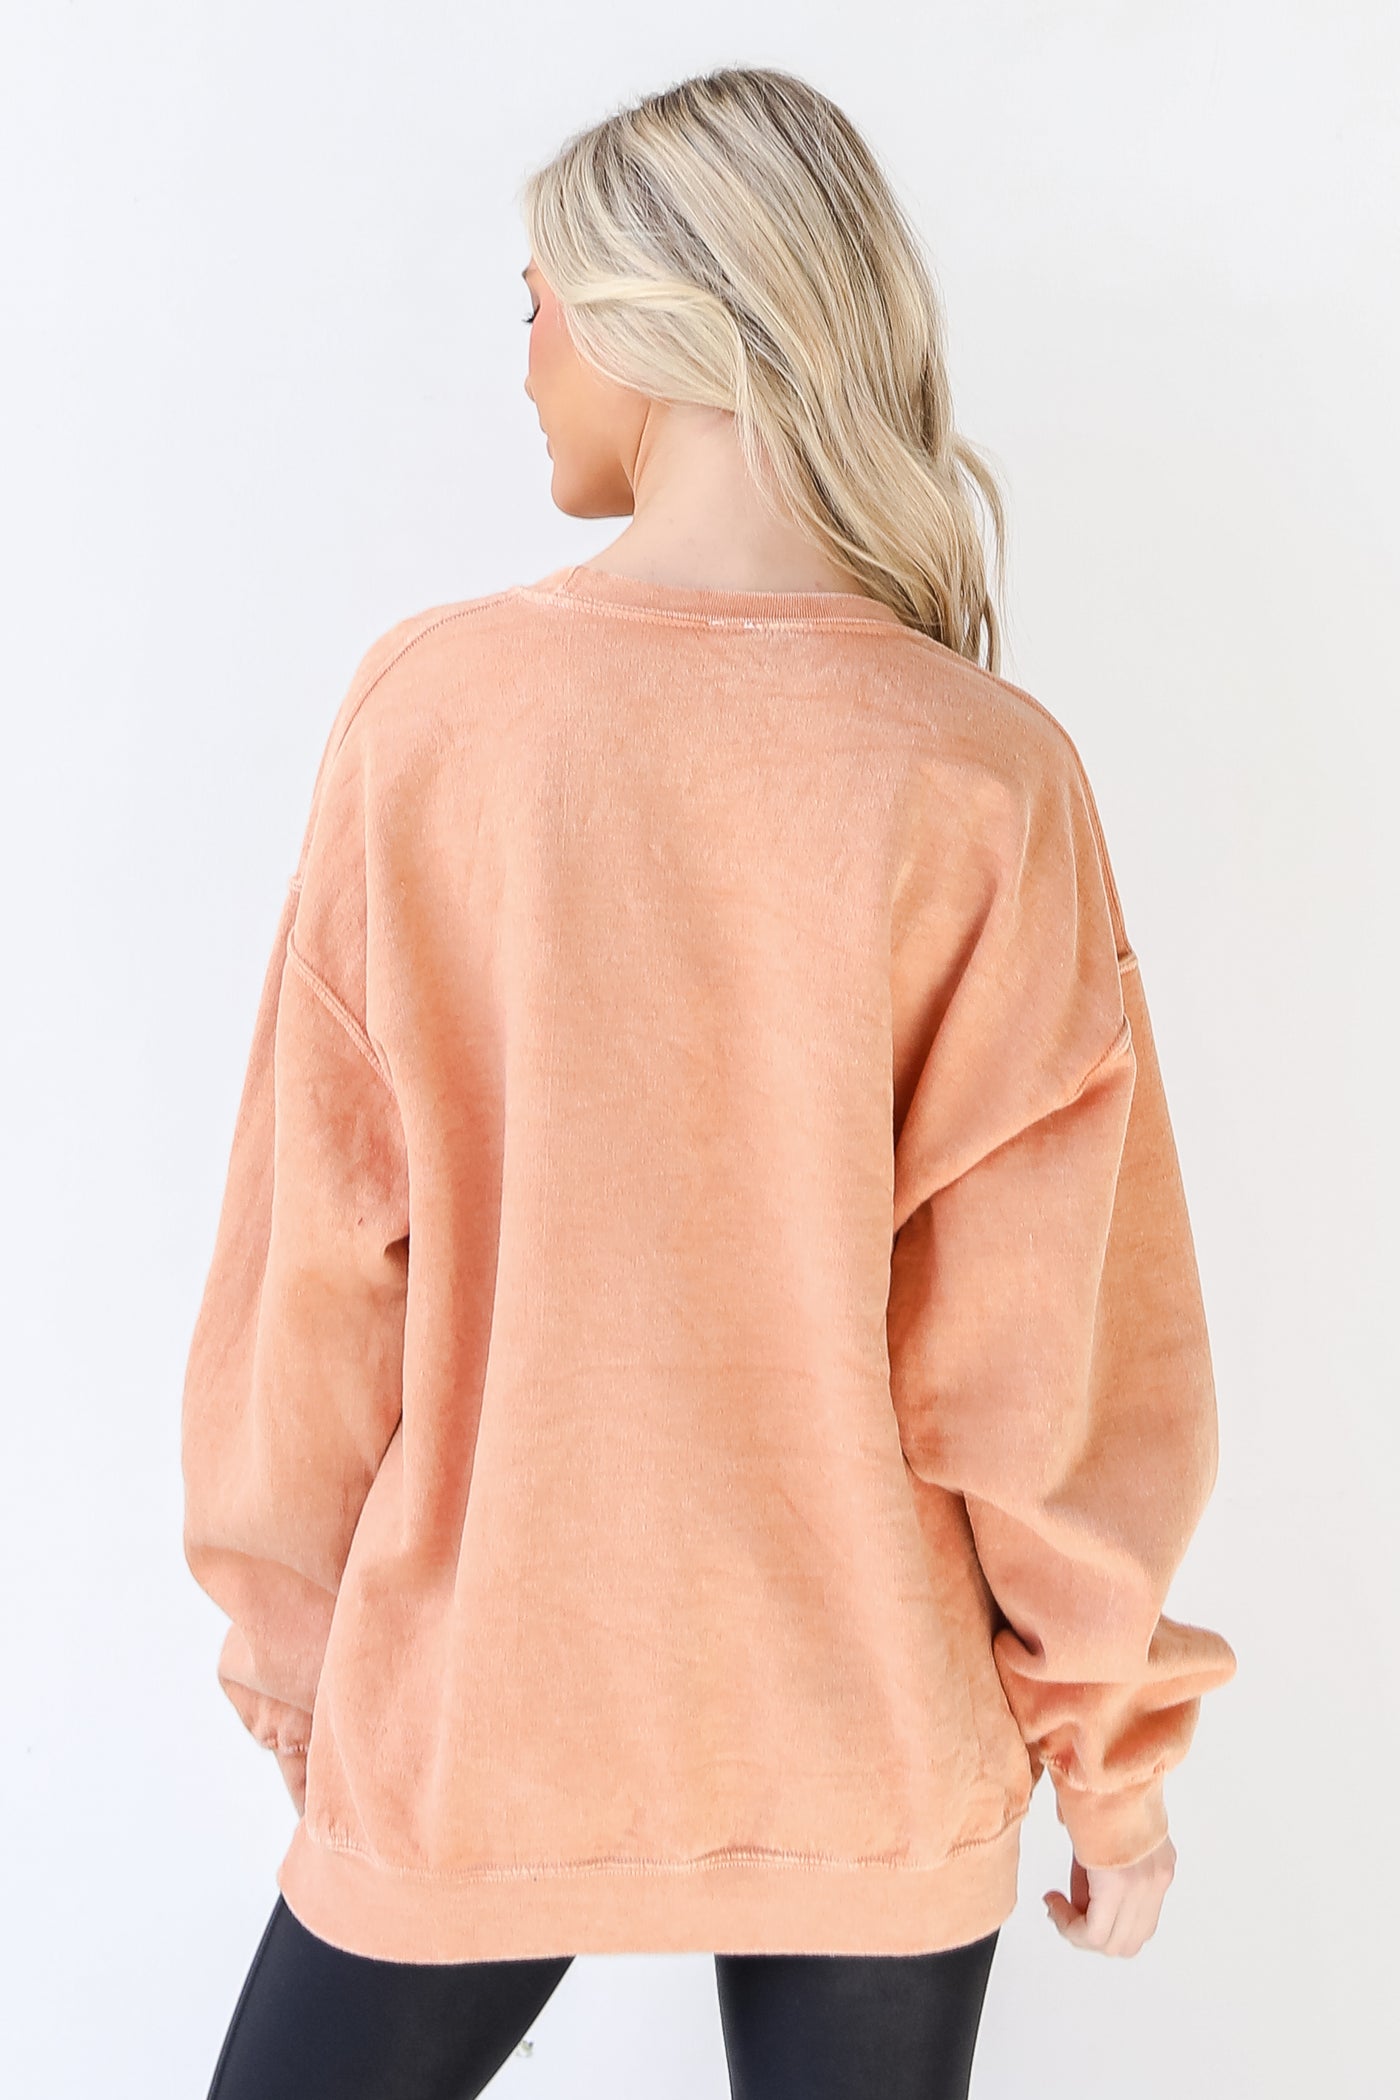 Smiley Face Oversized Pullover in rust back view